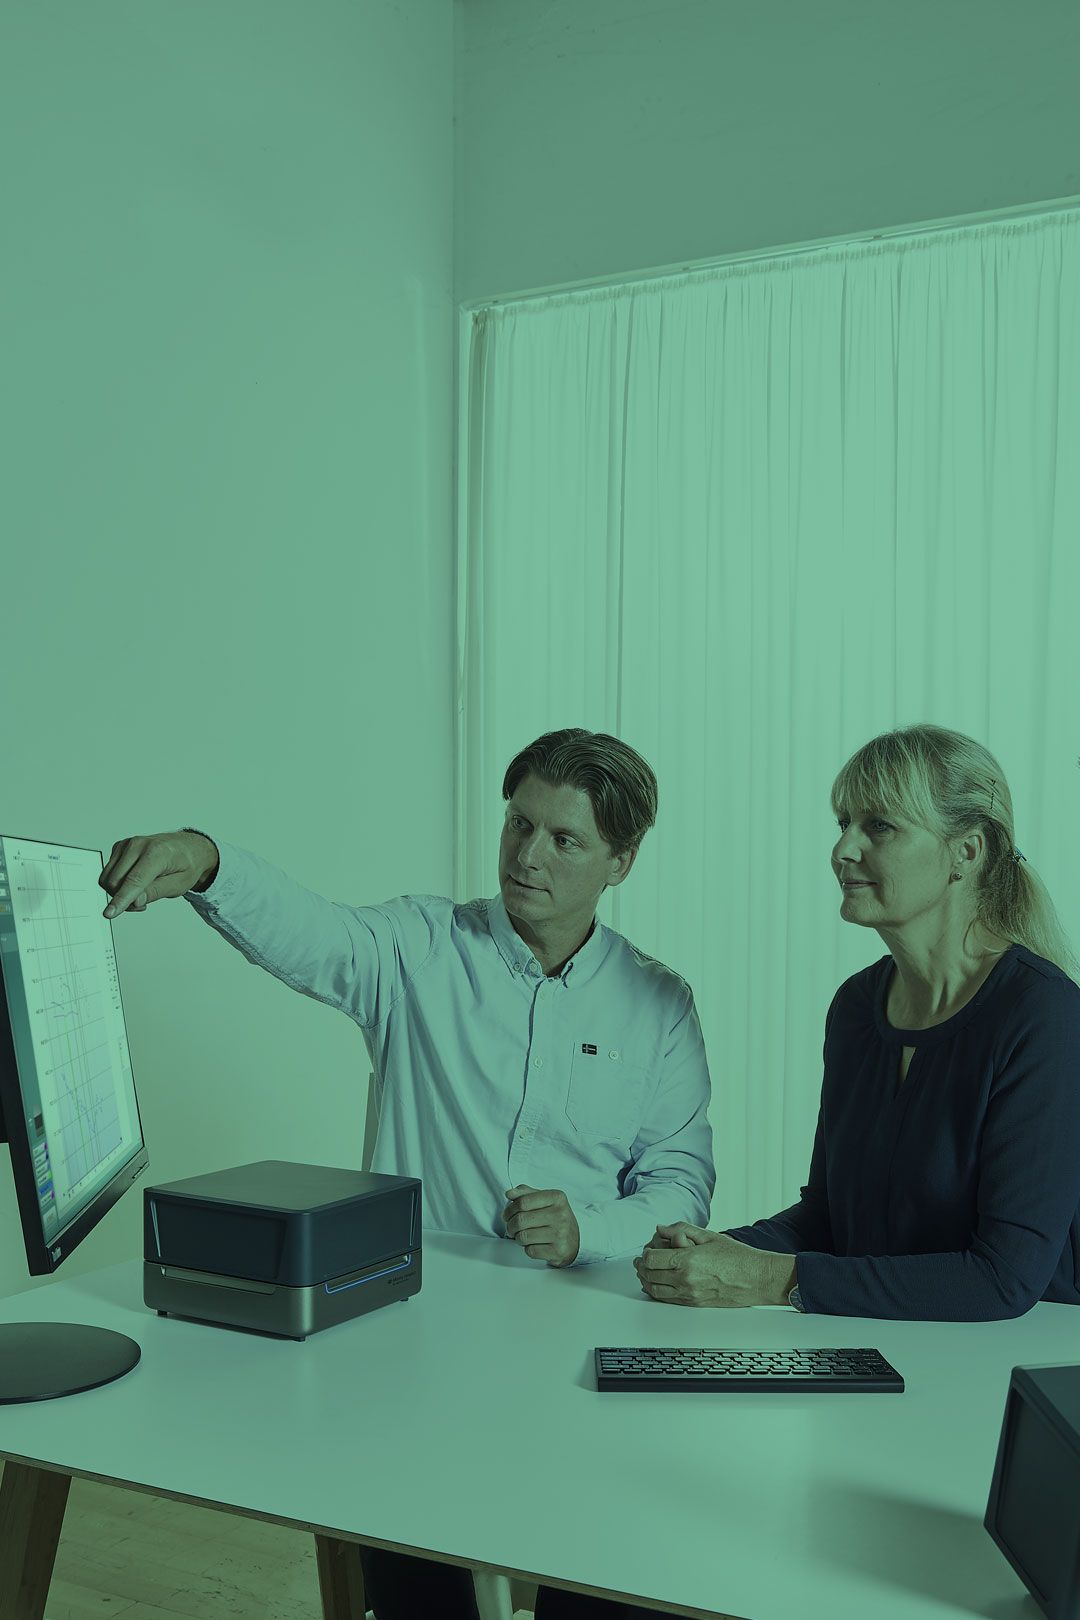 Male clinician showing female patient her visible speech mapping results on his flatscreen monitor.